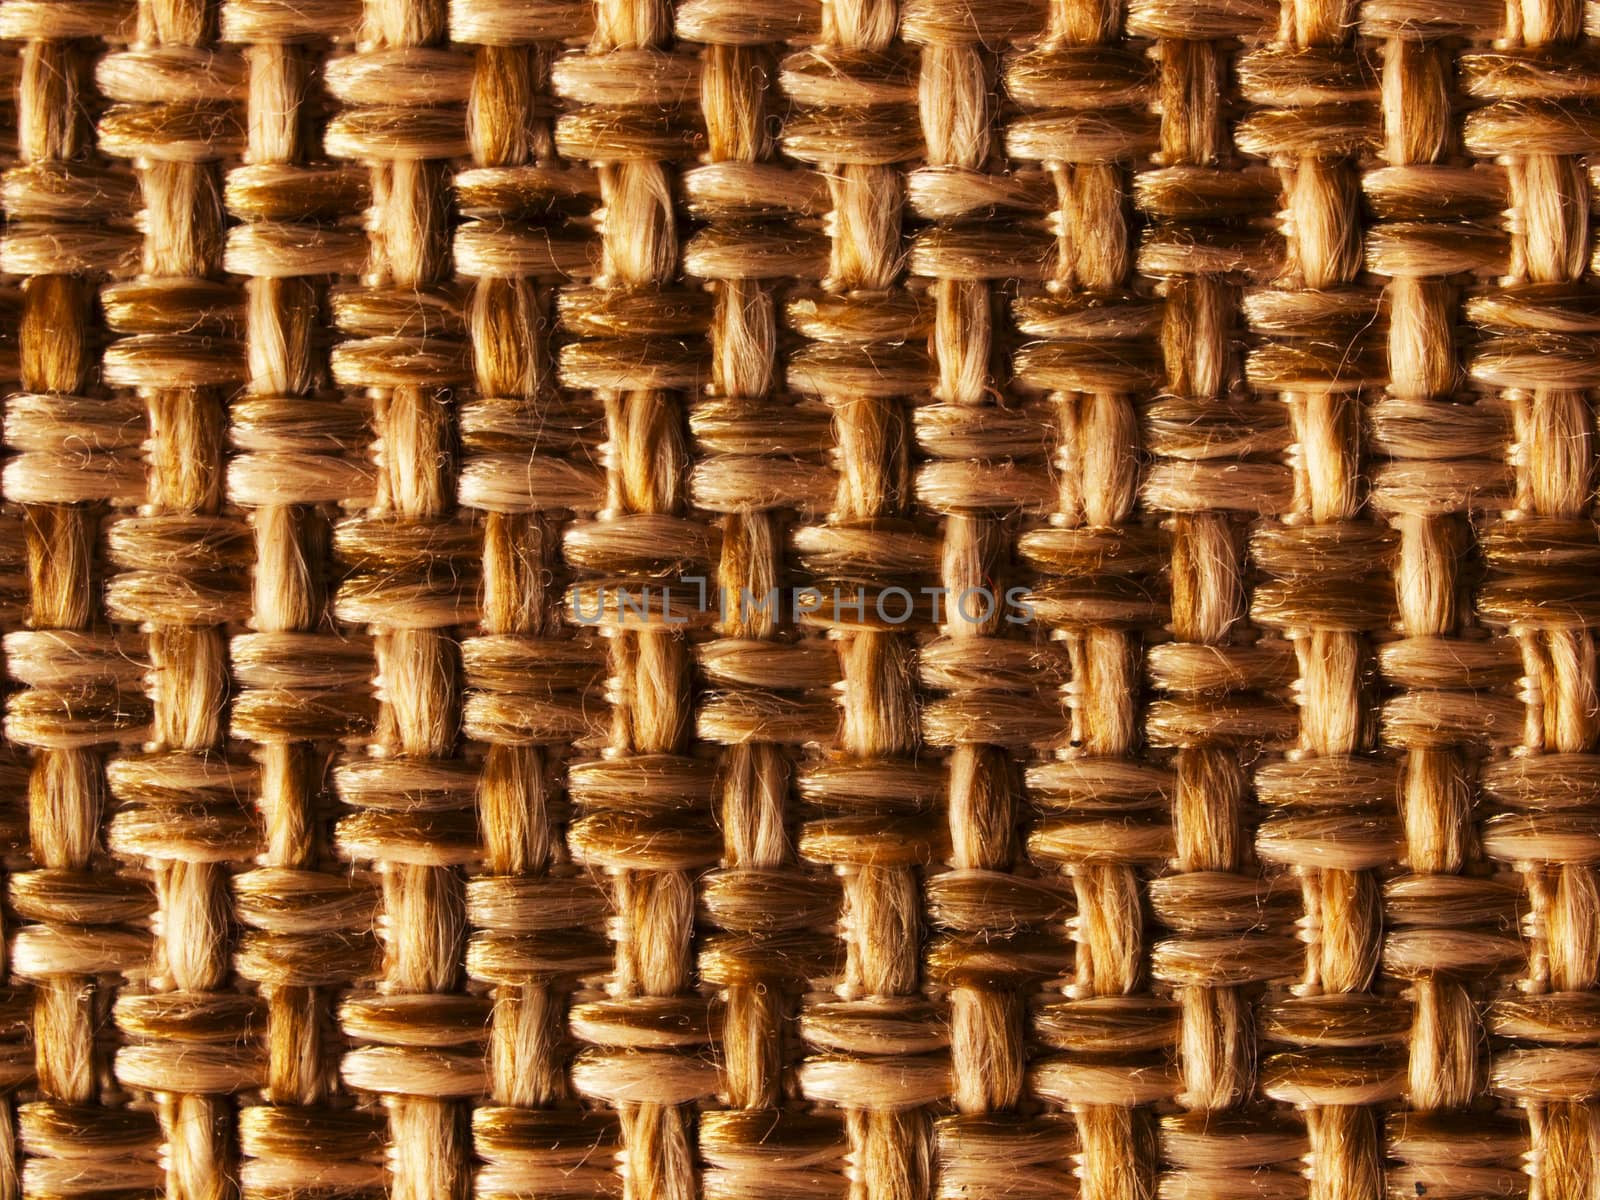 cloth fabric by zkruger